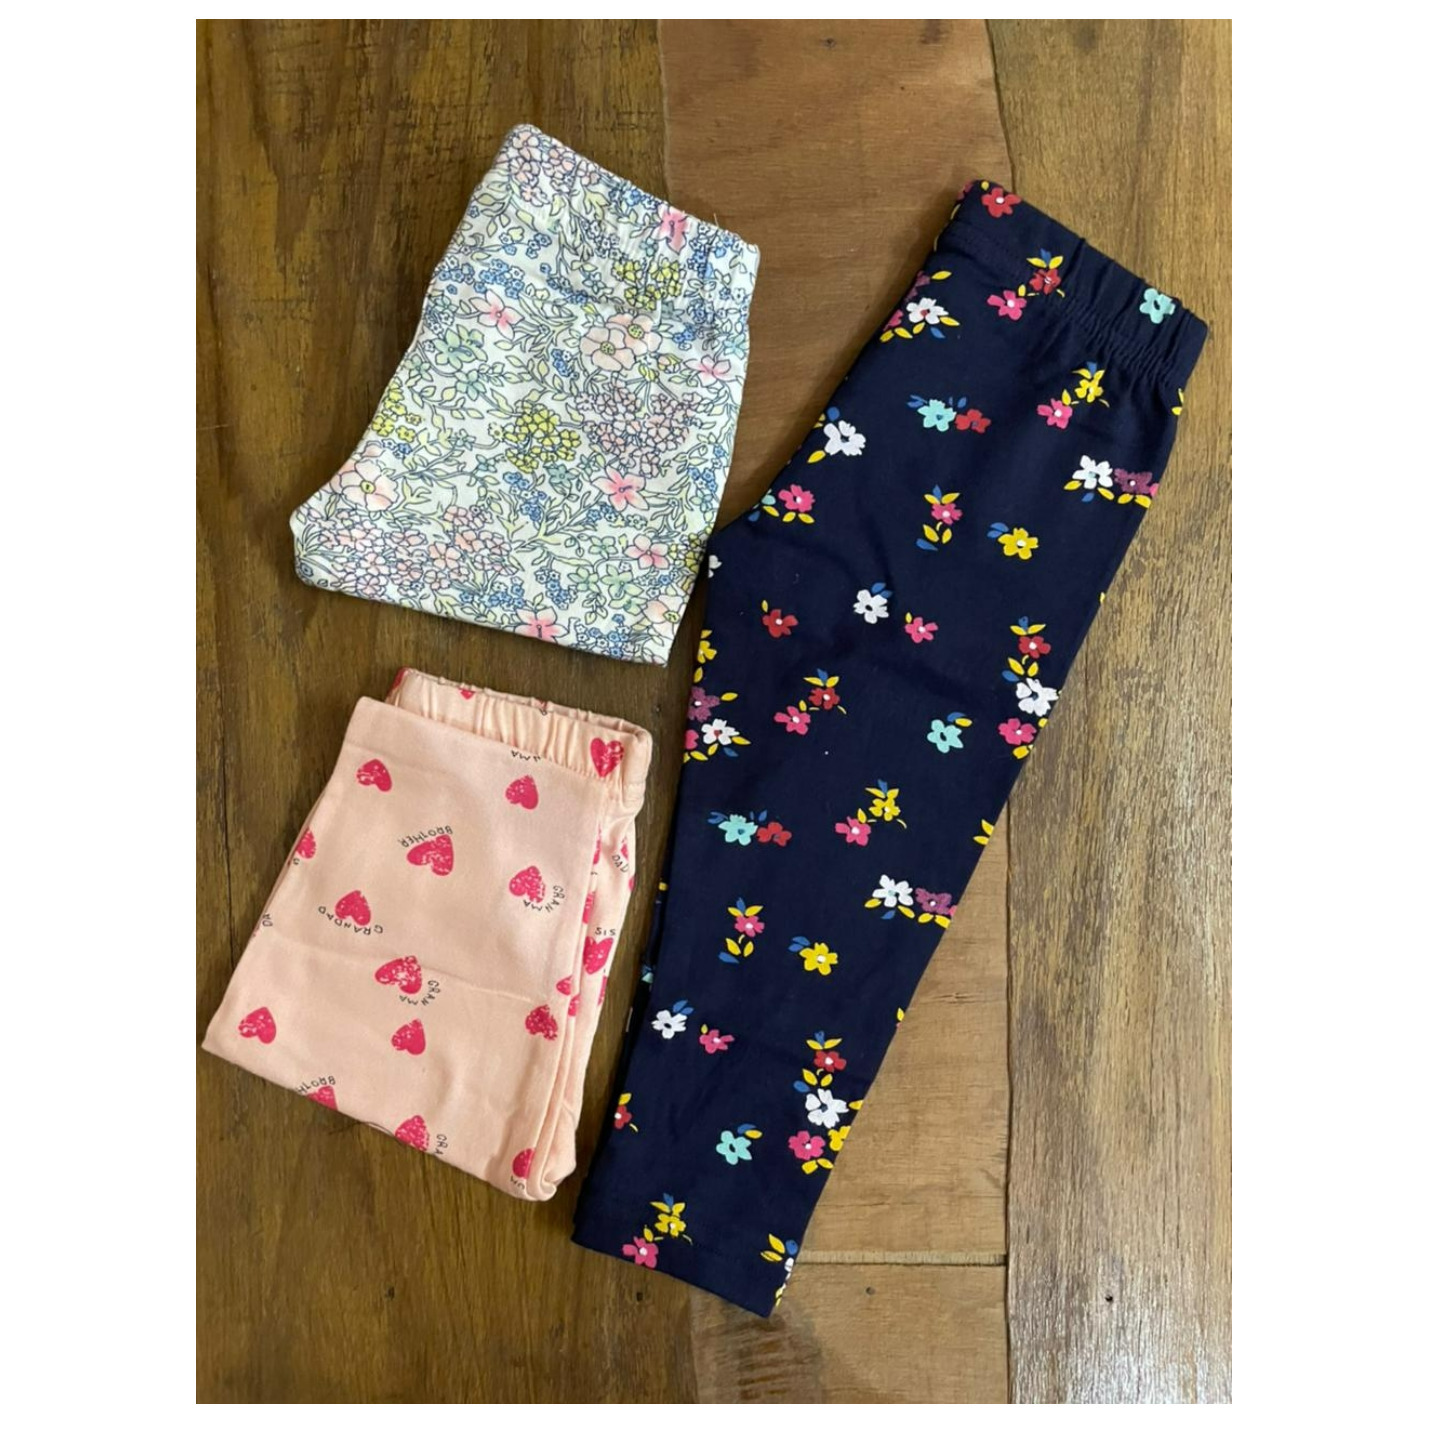 Cucumber Leggings Pack of 3 Rs 450 only Large 12 to 18 Months Size